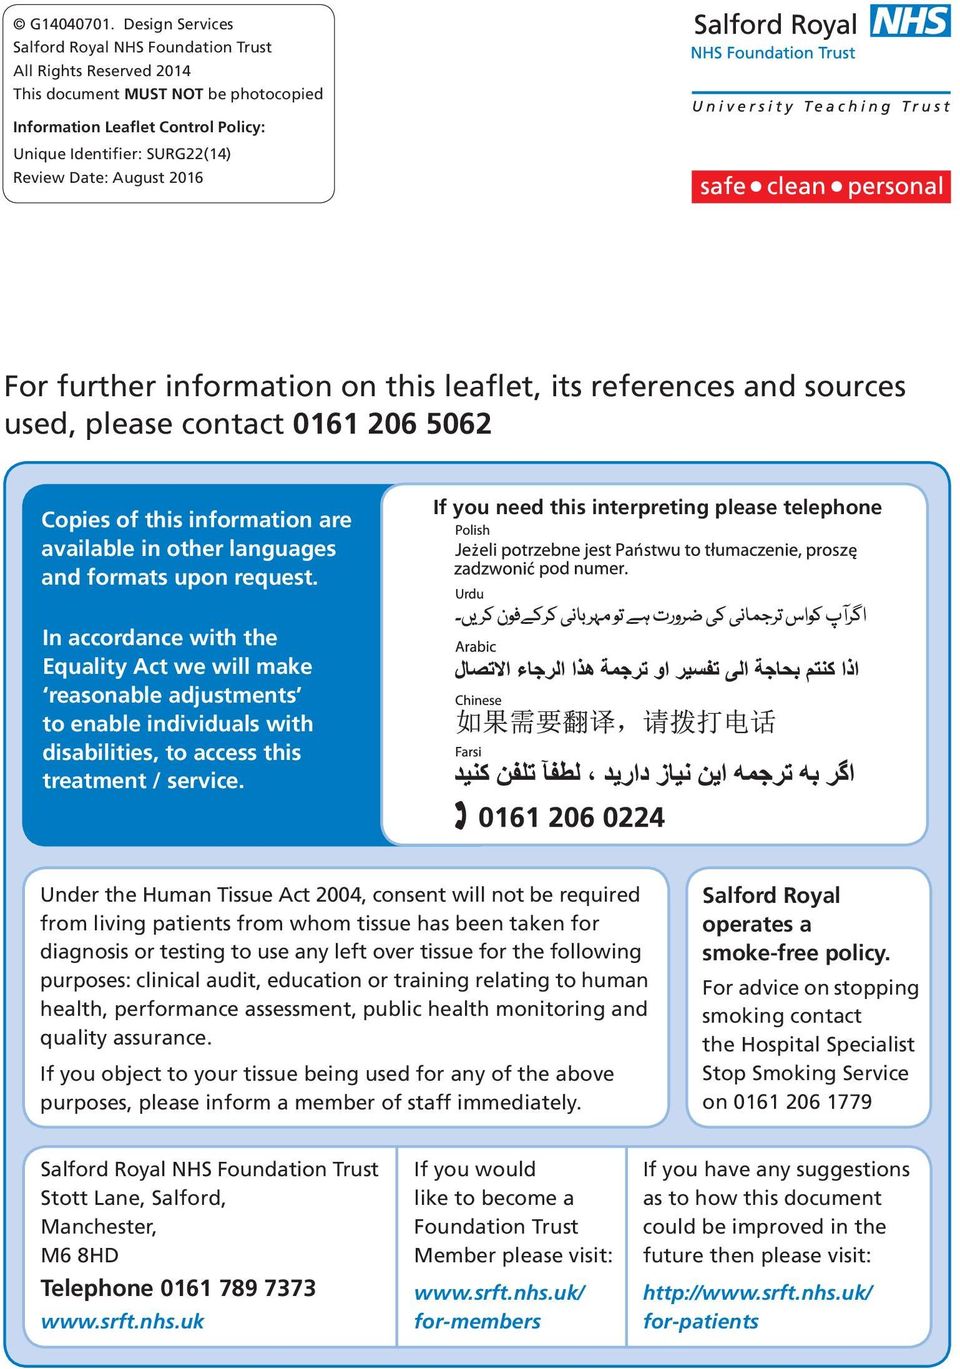 2016 For further information on this leaflet, its references and sources used, please contact 0161 206 5062 Copies of this information are available in other languages and formats upon request.